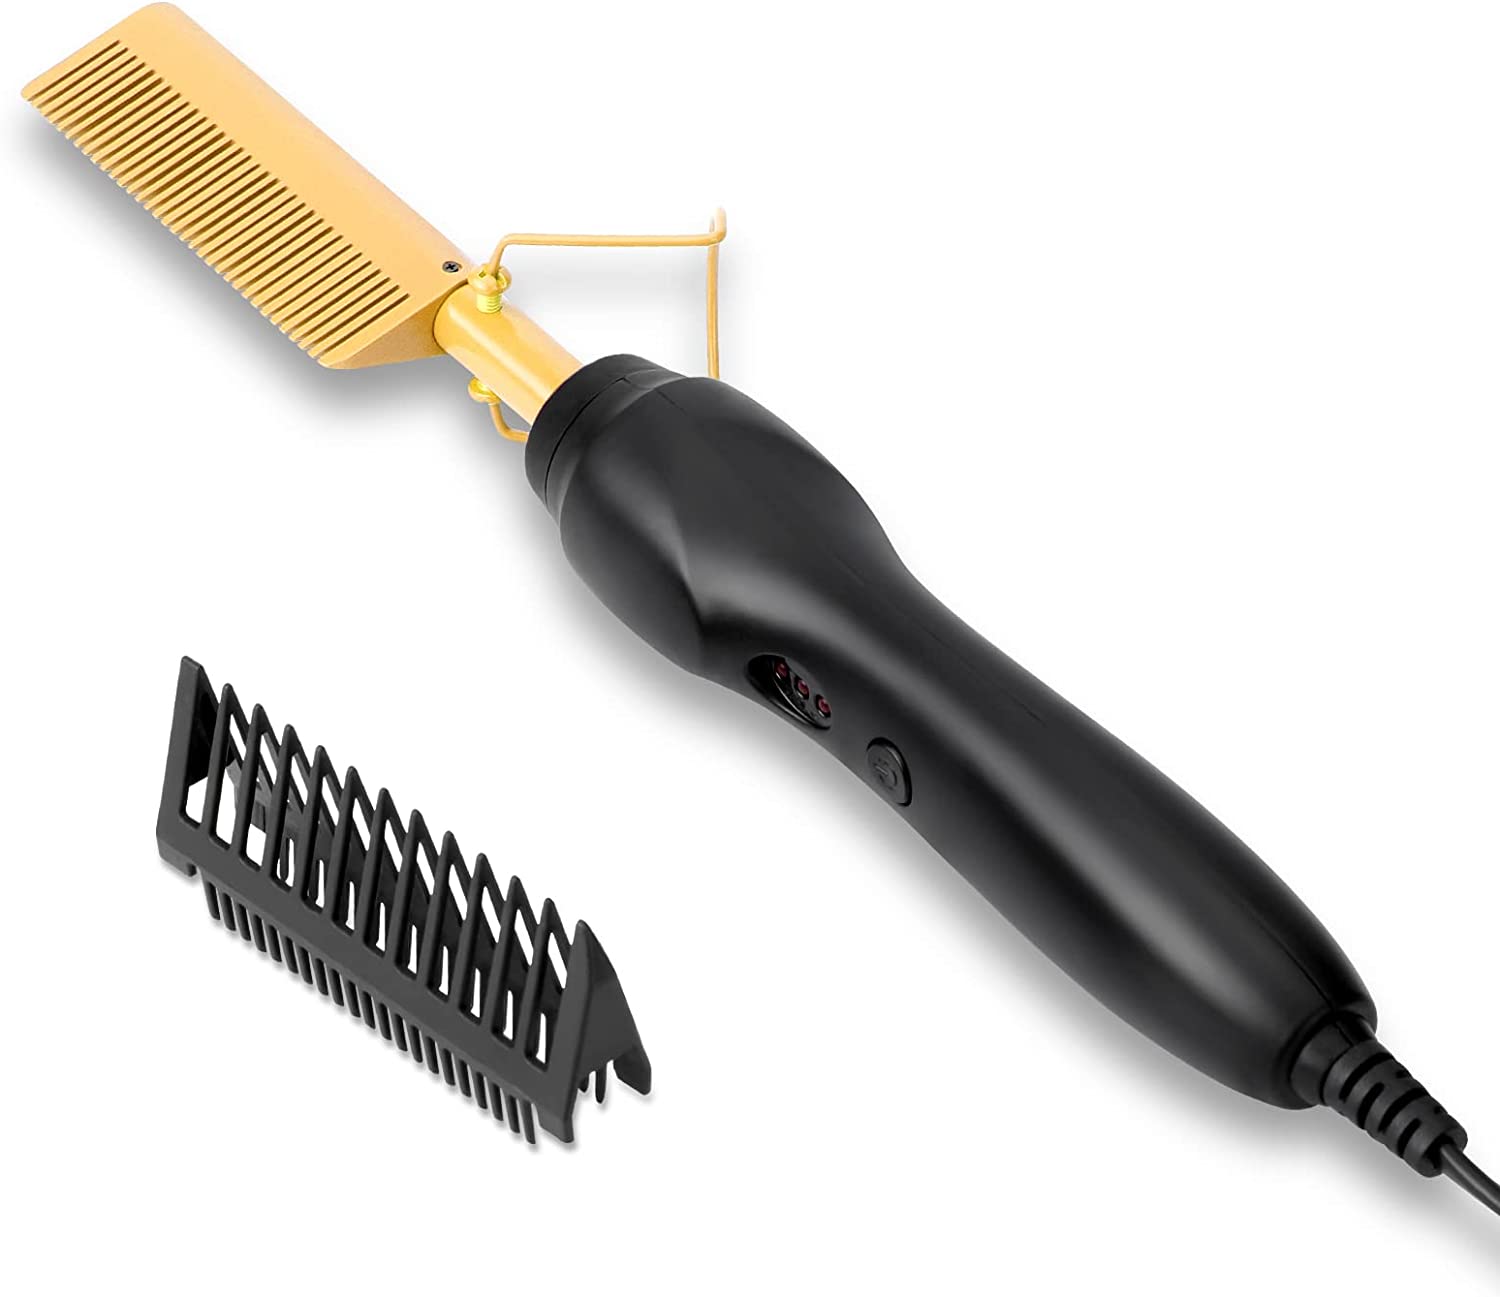 Hot Comb Electric Hair Straightening - Professional Pressing Combs Ceramic Flat Iron Electrical Press Comb Straightener for Black Natural Hair Wigs | High Heat | Fast Heating